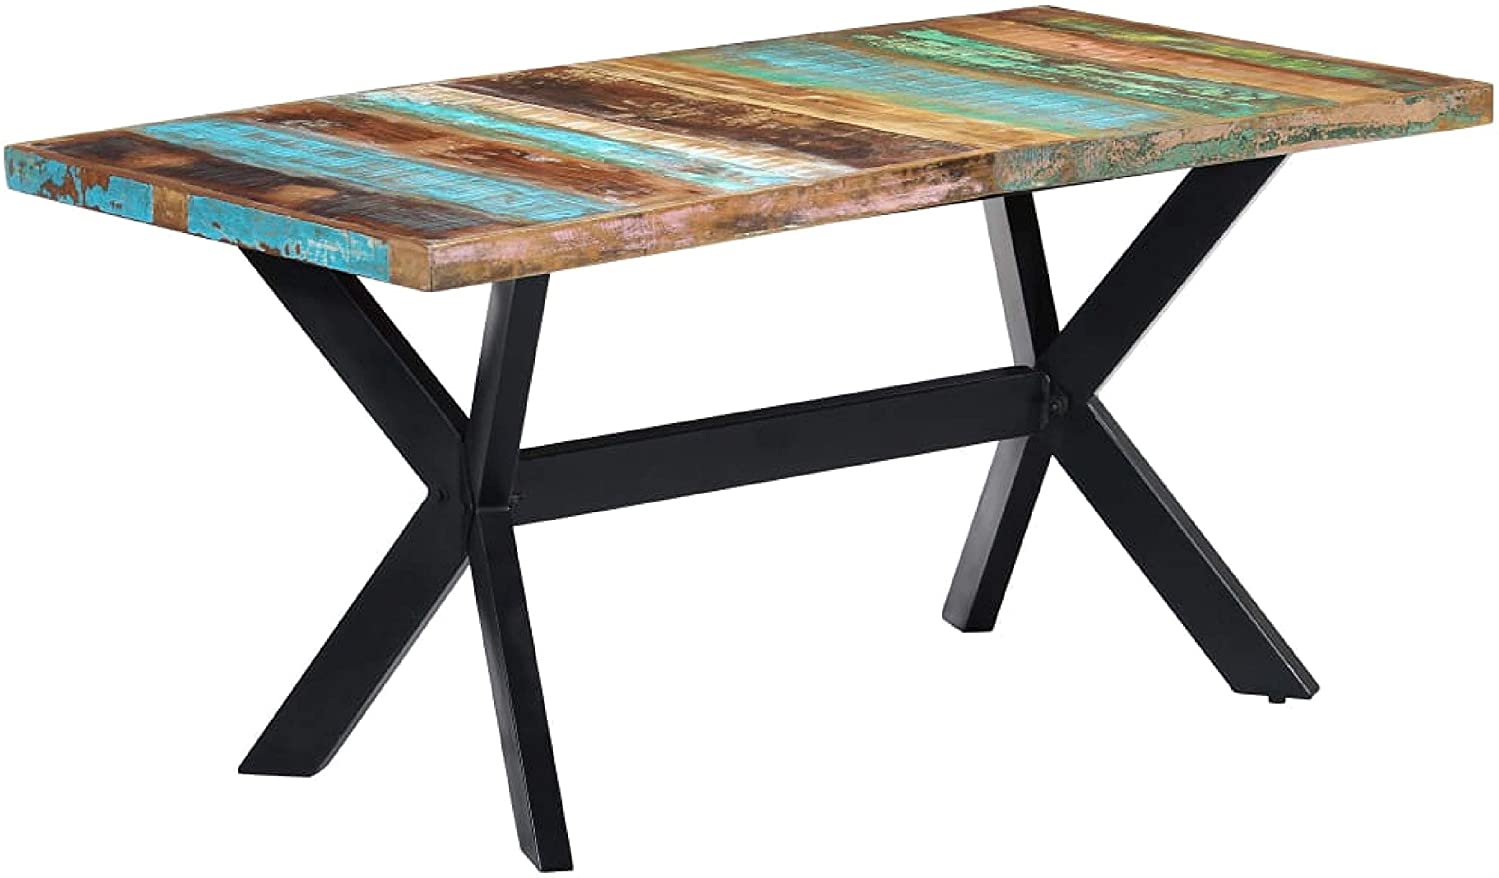 B08TVXLCCK Kitchen & Dining Room Table, Dining Table 63"x31.5"x29.5" Solid Reclaimed Wood